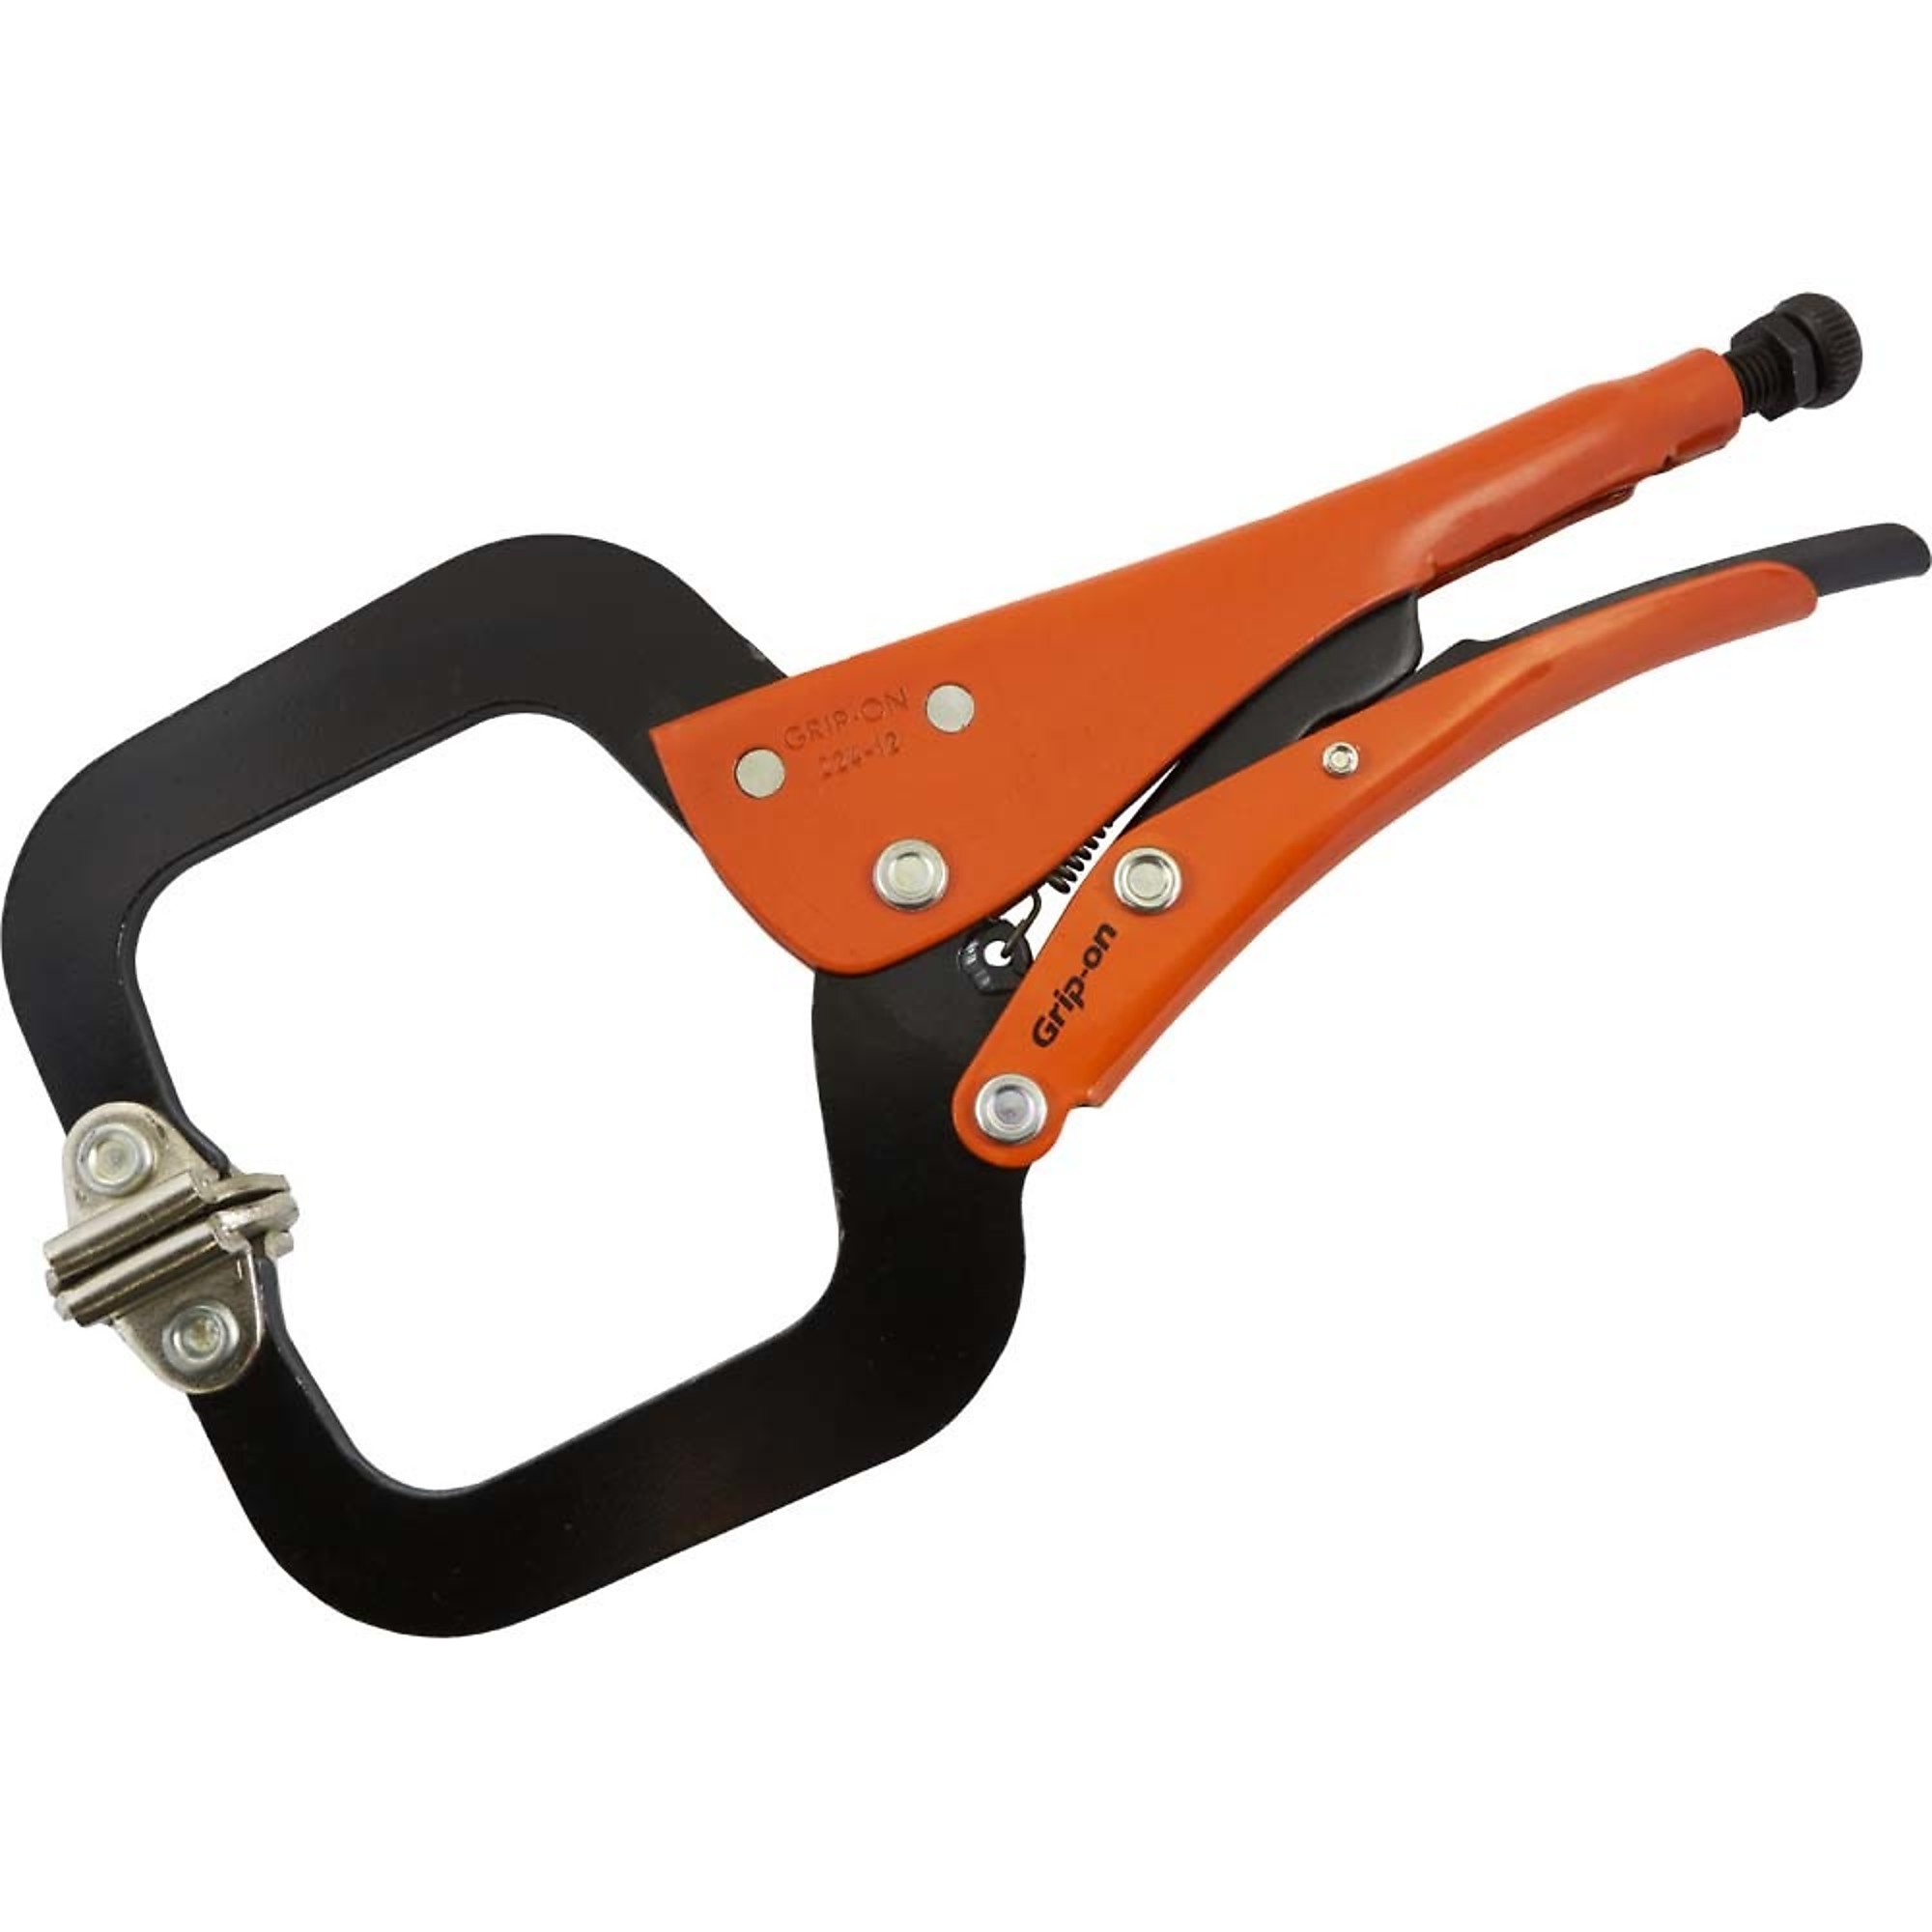 Grip-on, 12Inch Locking C-clamp Plier, Pieces (qty.) 1 Material Alloy Steel, Jaw Capacity 3.94 in, Model 224-12